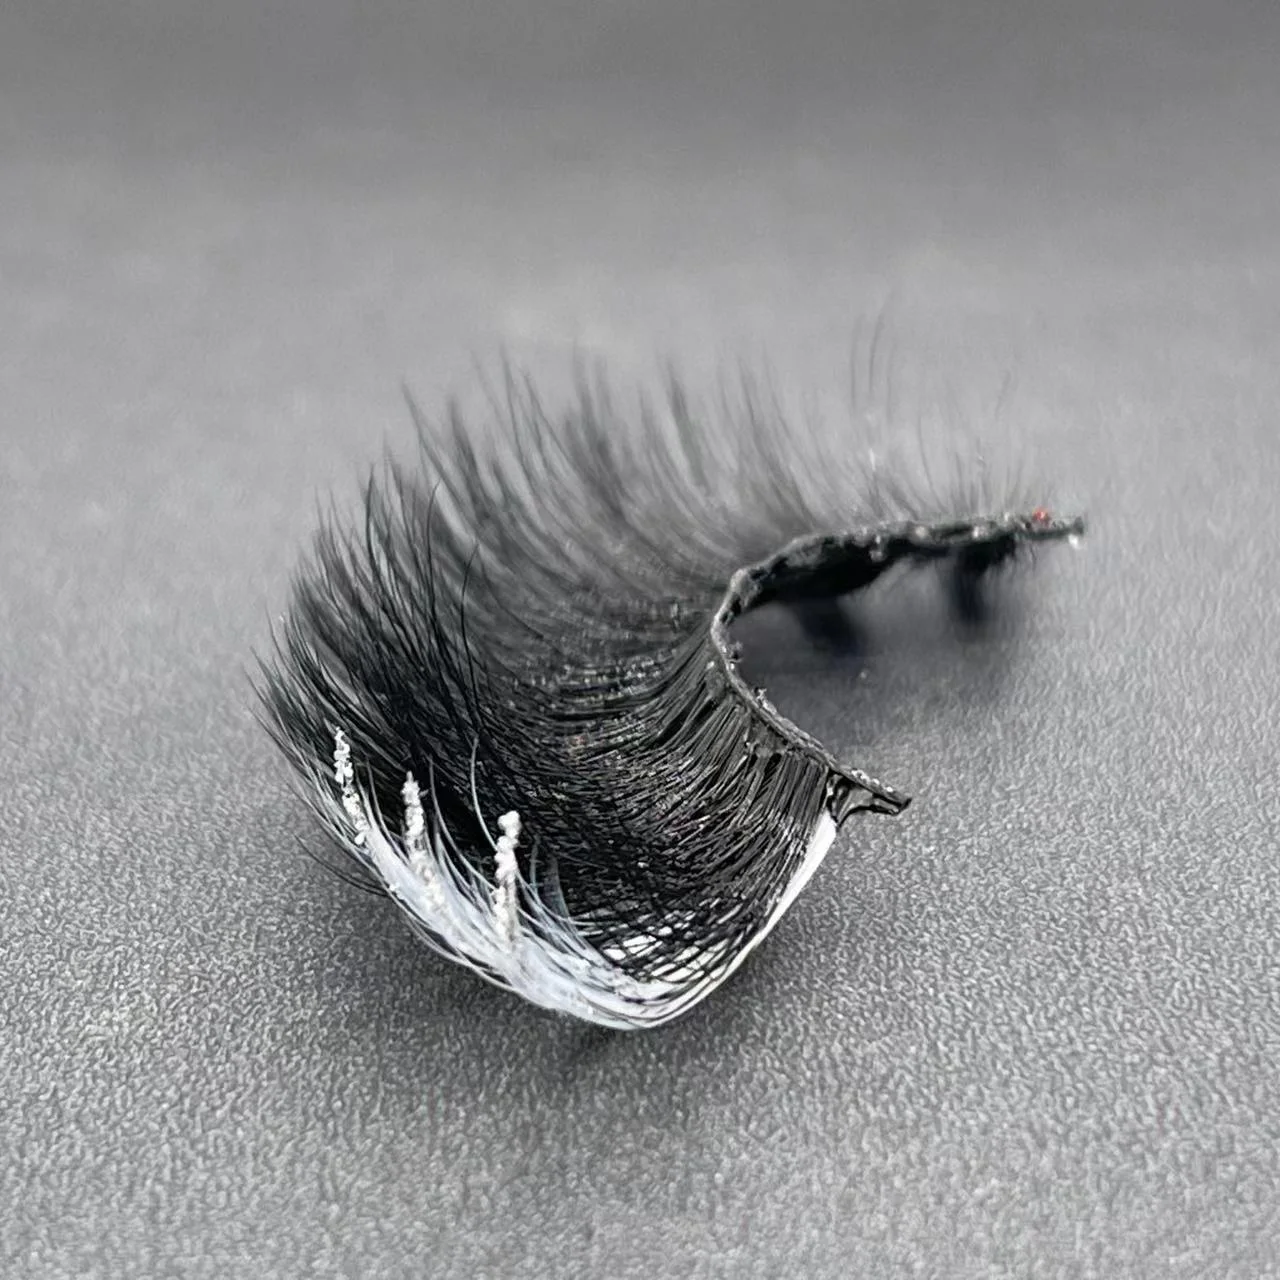 Hbzgtlad Colored Lashes Glitter Mink 15mm -20mm Fluffy Color Streaks Cosplay Makeup Beauty Eyelashes -Outlet Maid Outfit Store Sd911f489e6a443e3a0367a9d351f2a15N.jpg